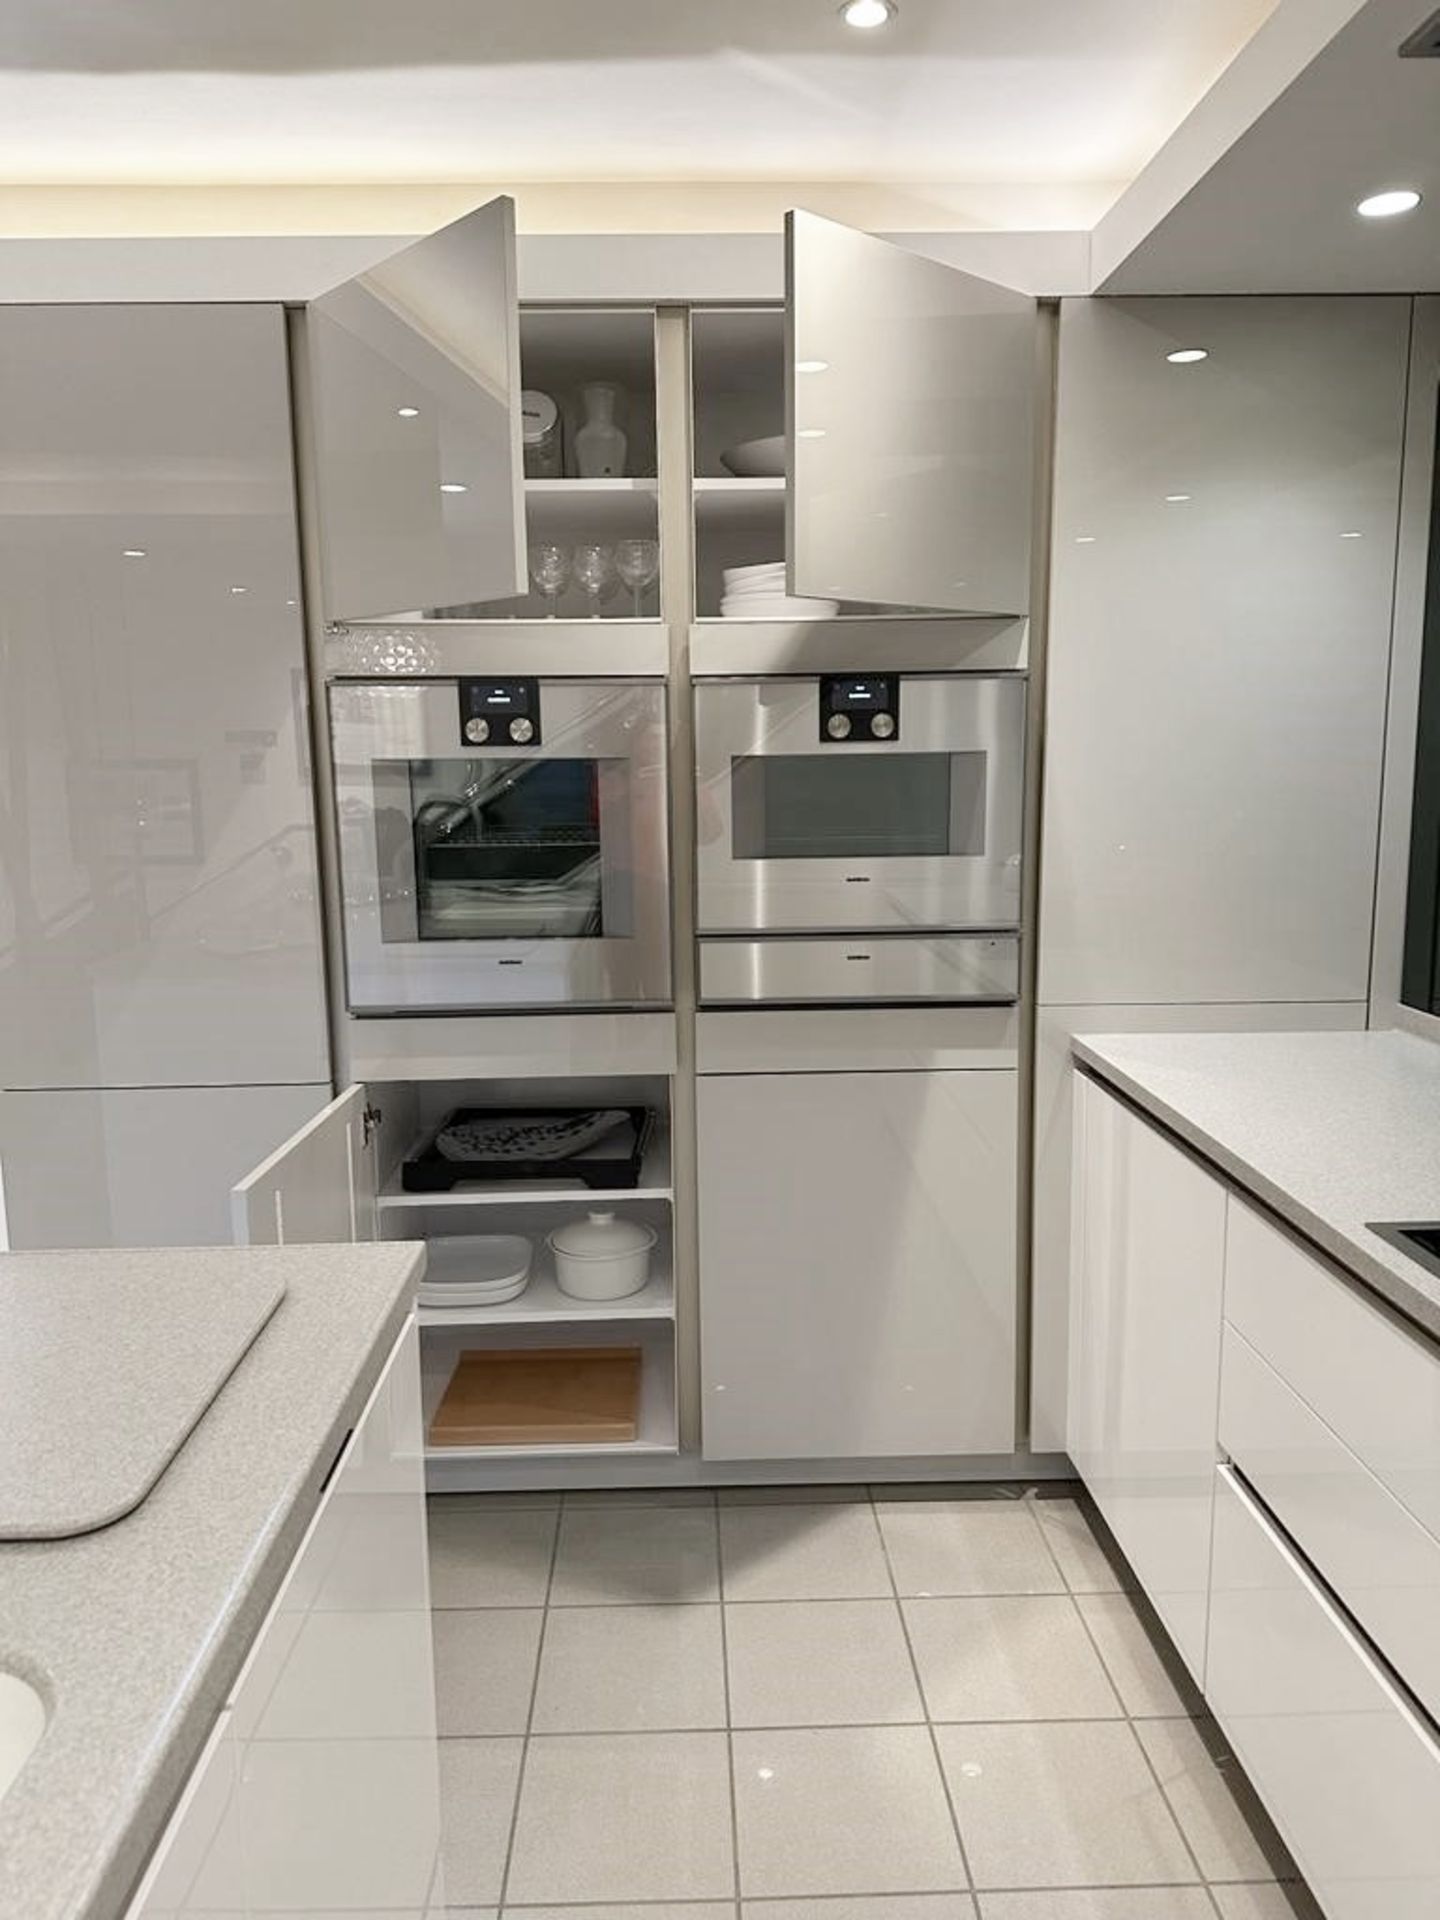 1 x SIEMATIC Contemporary 'S2' Fitted Kitchen In Gloss White And Grey *Ex-Display Showroom Model* - Image 11 of 16